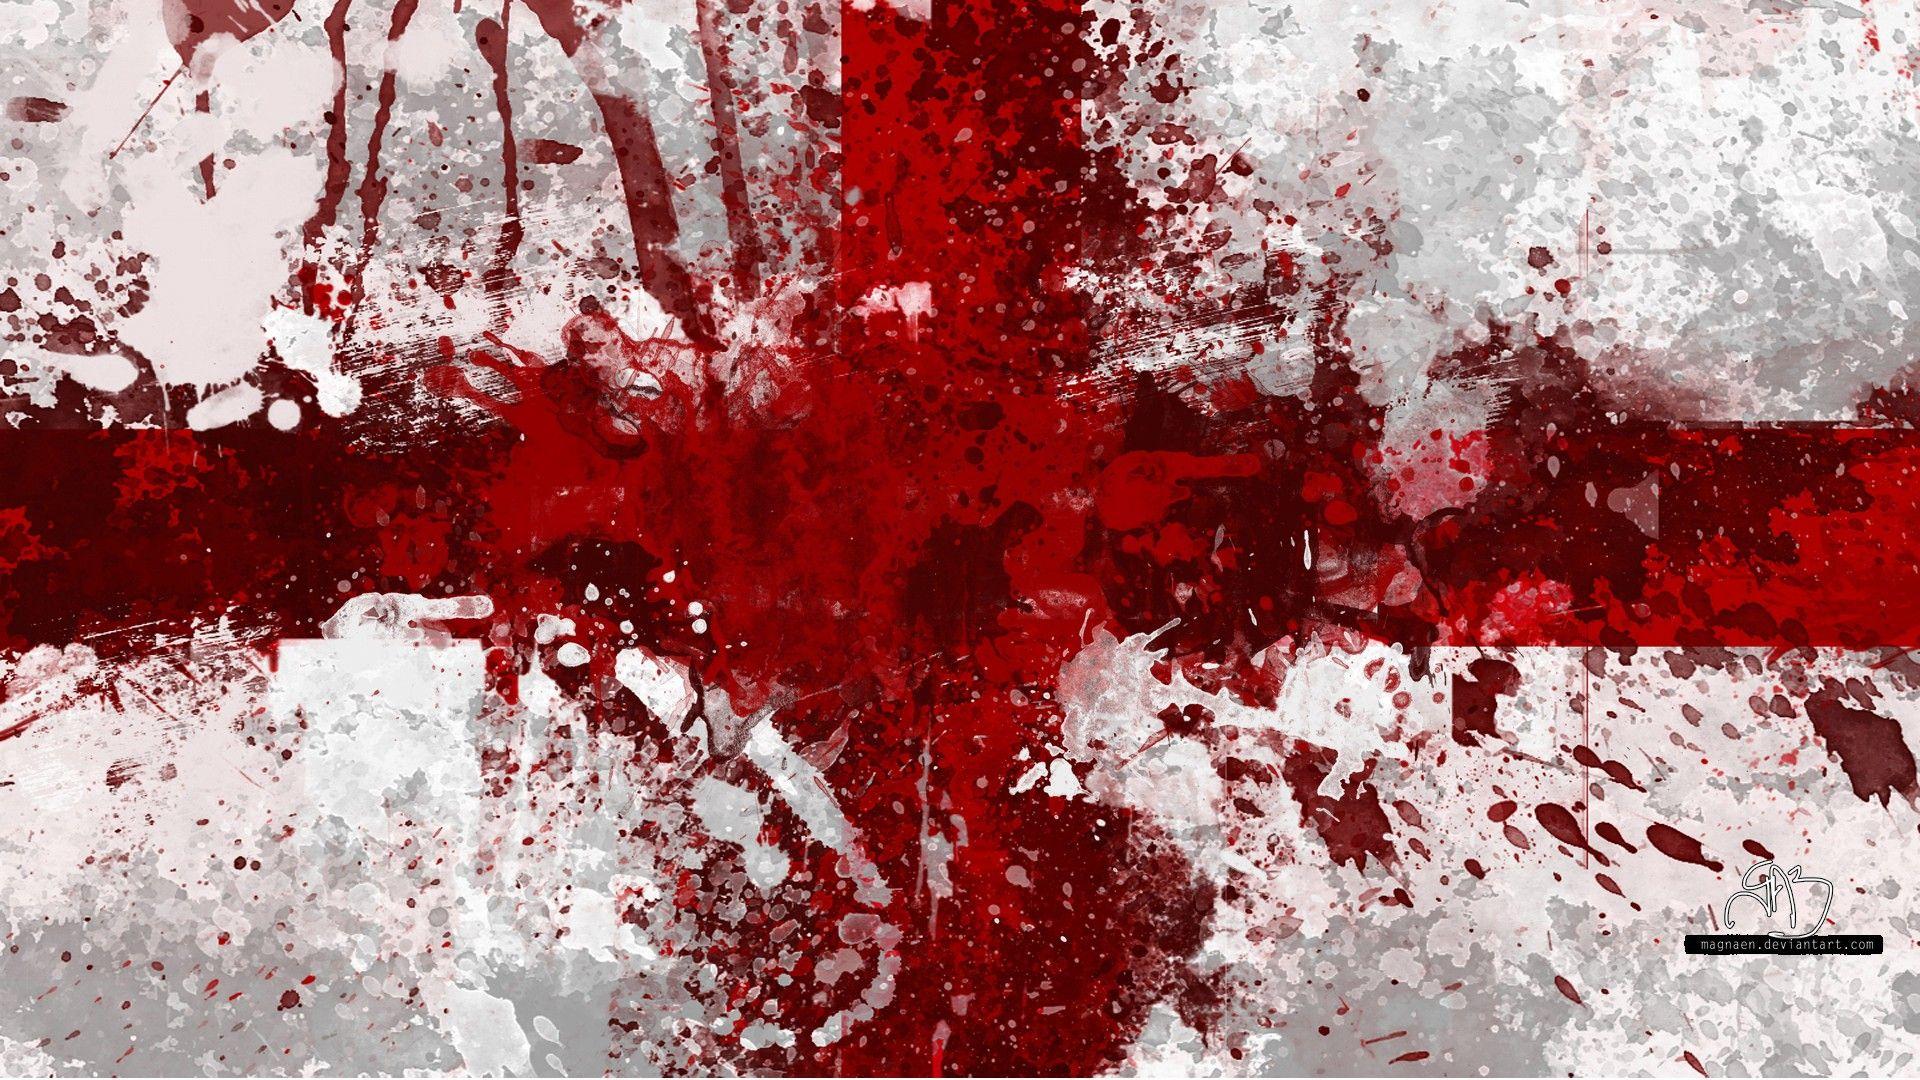 1920 x 1080 · jpeg - Blood Aesthetic Wallpapers - Wallpaper Cave